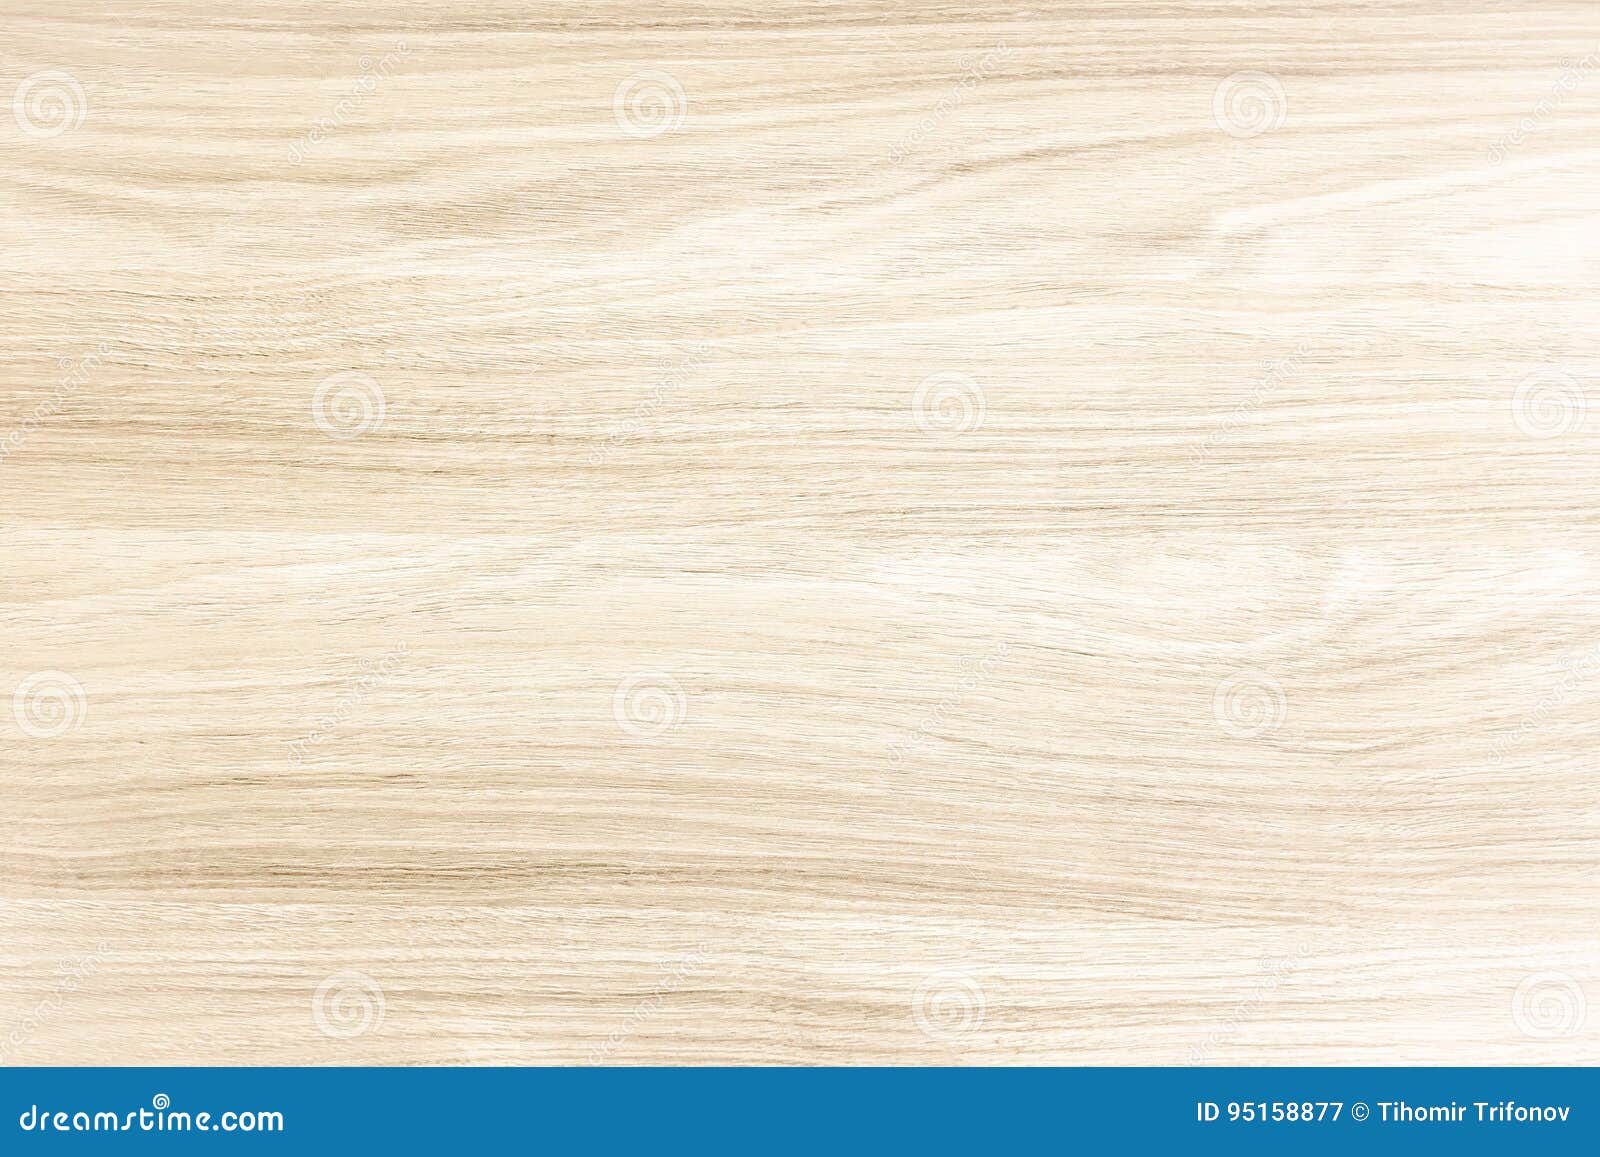 light wood texture background surface with old natural pattern or old wood texture table top view. grunge surface with wood textur